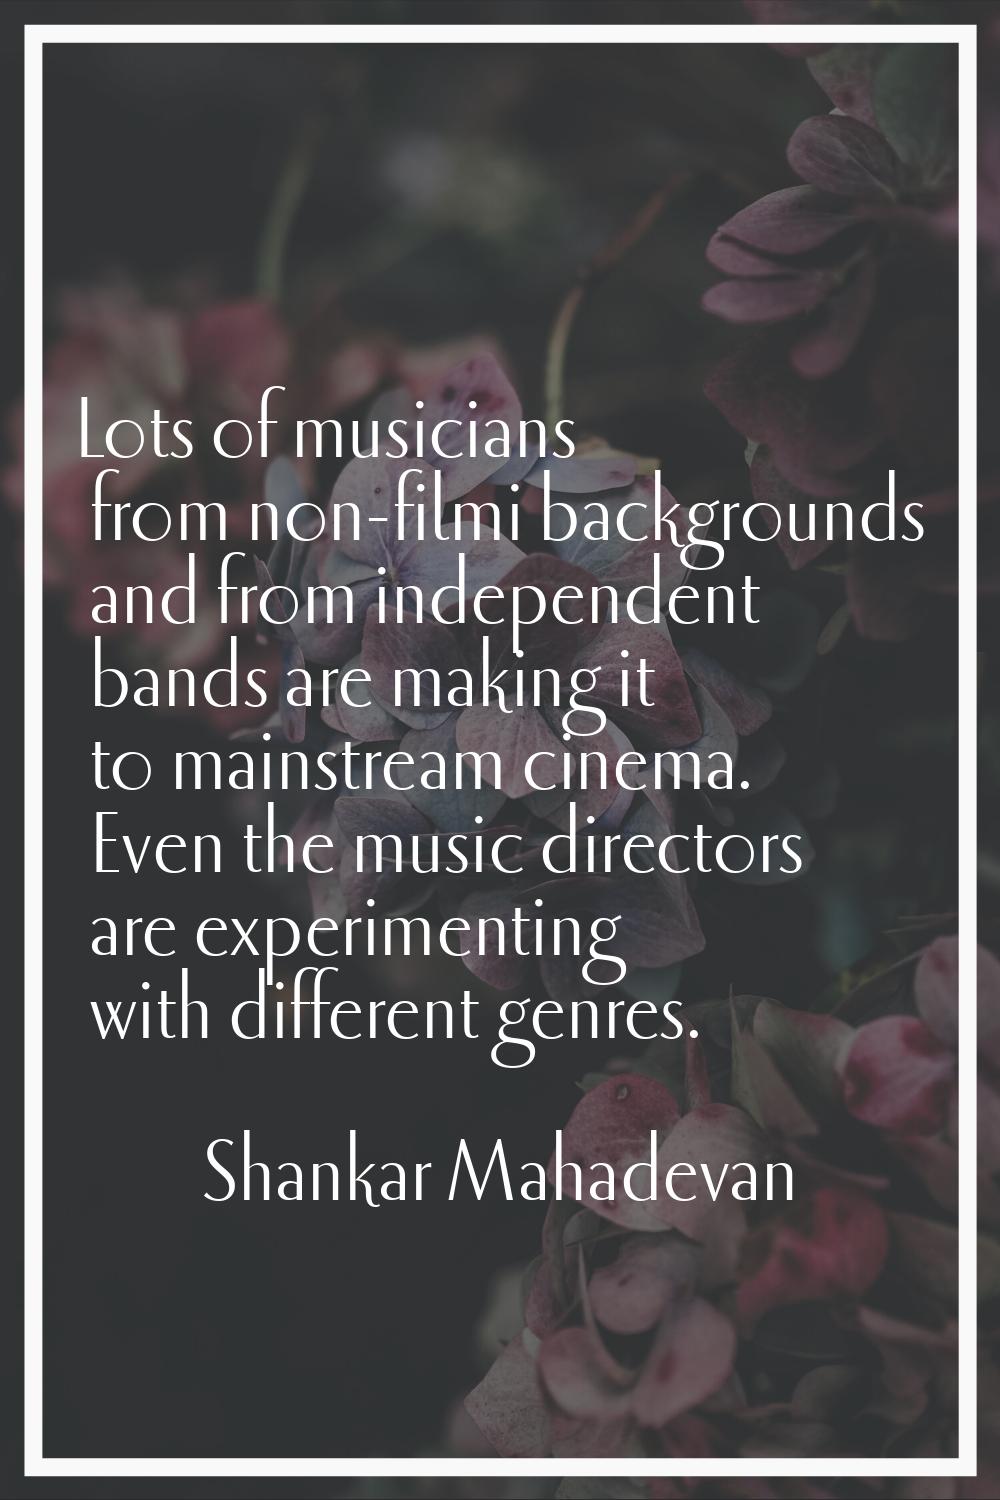 Lots of musicians from non-filmi backgrounds and from independent bands are making it to mainstream